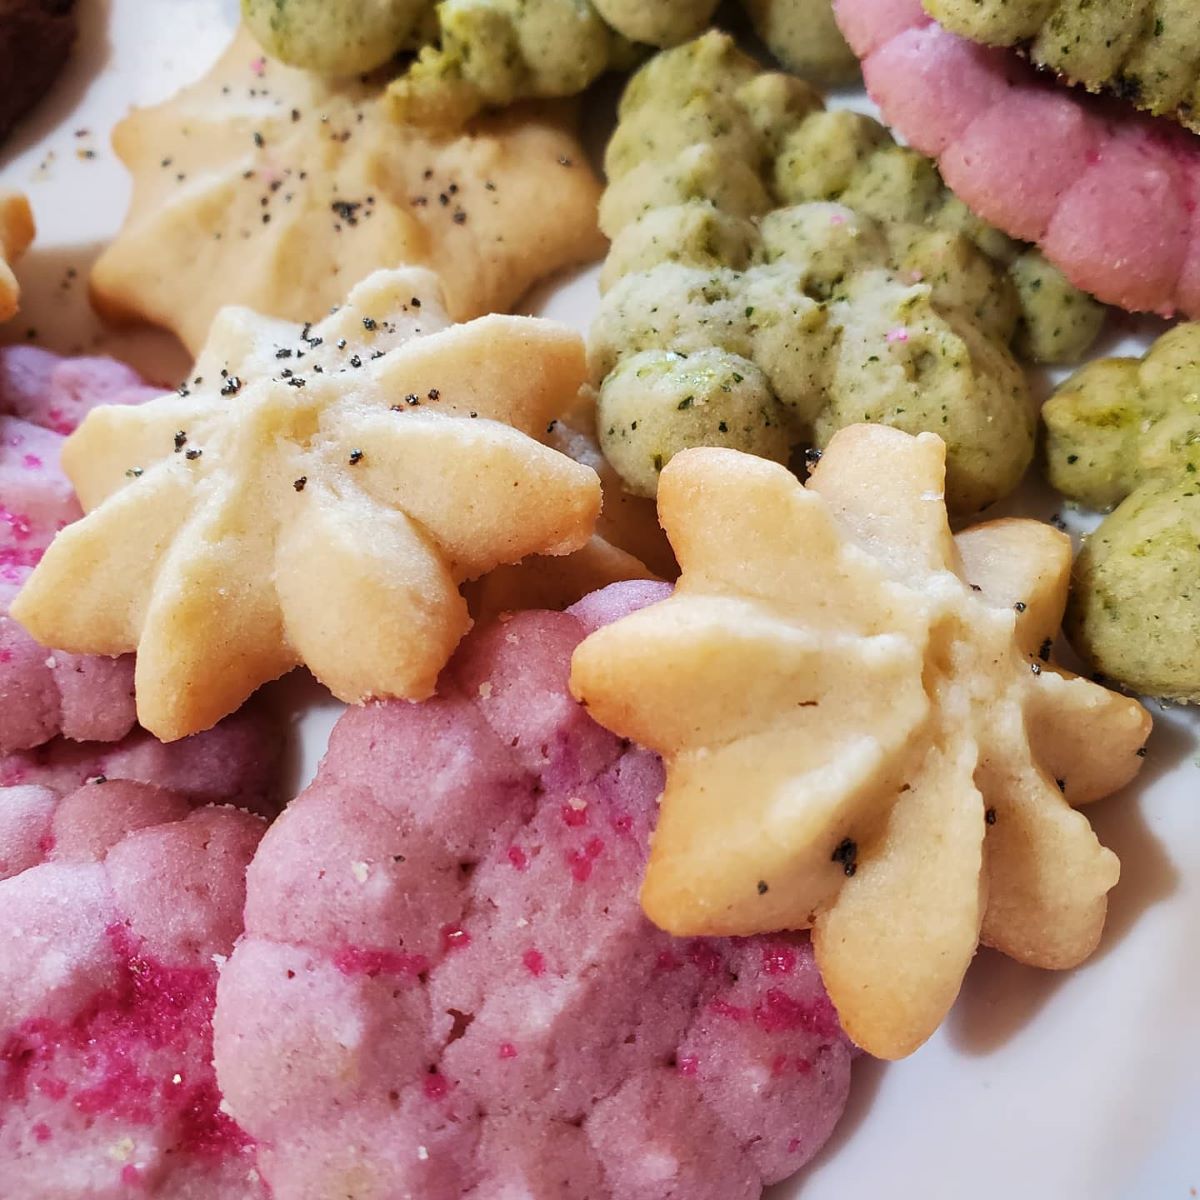 A close-up shot of white (star-shaped), pink (flower-shaped), and green (tree-shaped) spritz cookies sprinkled with something black. Photo by Heidi Leuszler.